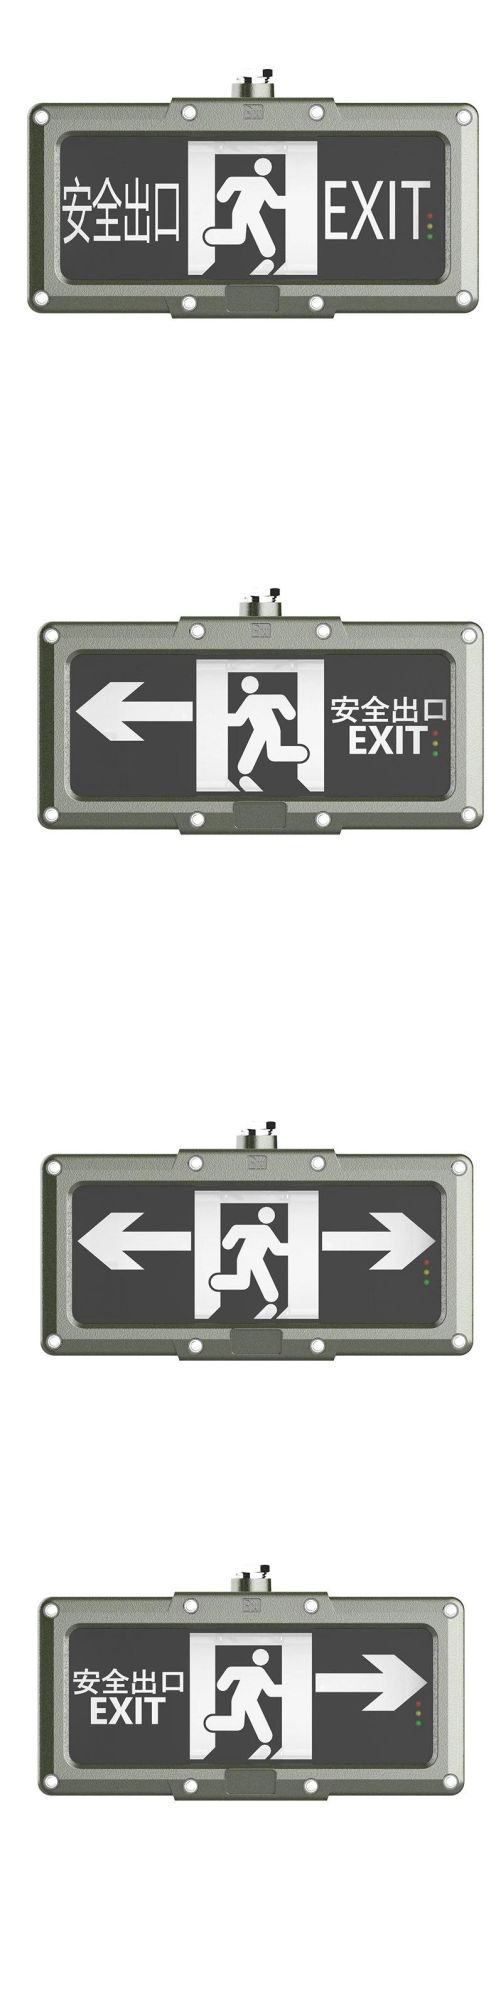 Explosion-Proof Emergency Safety Exit Indicator Light